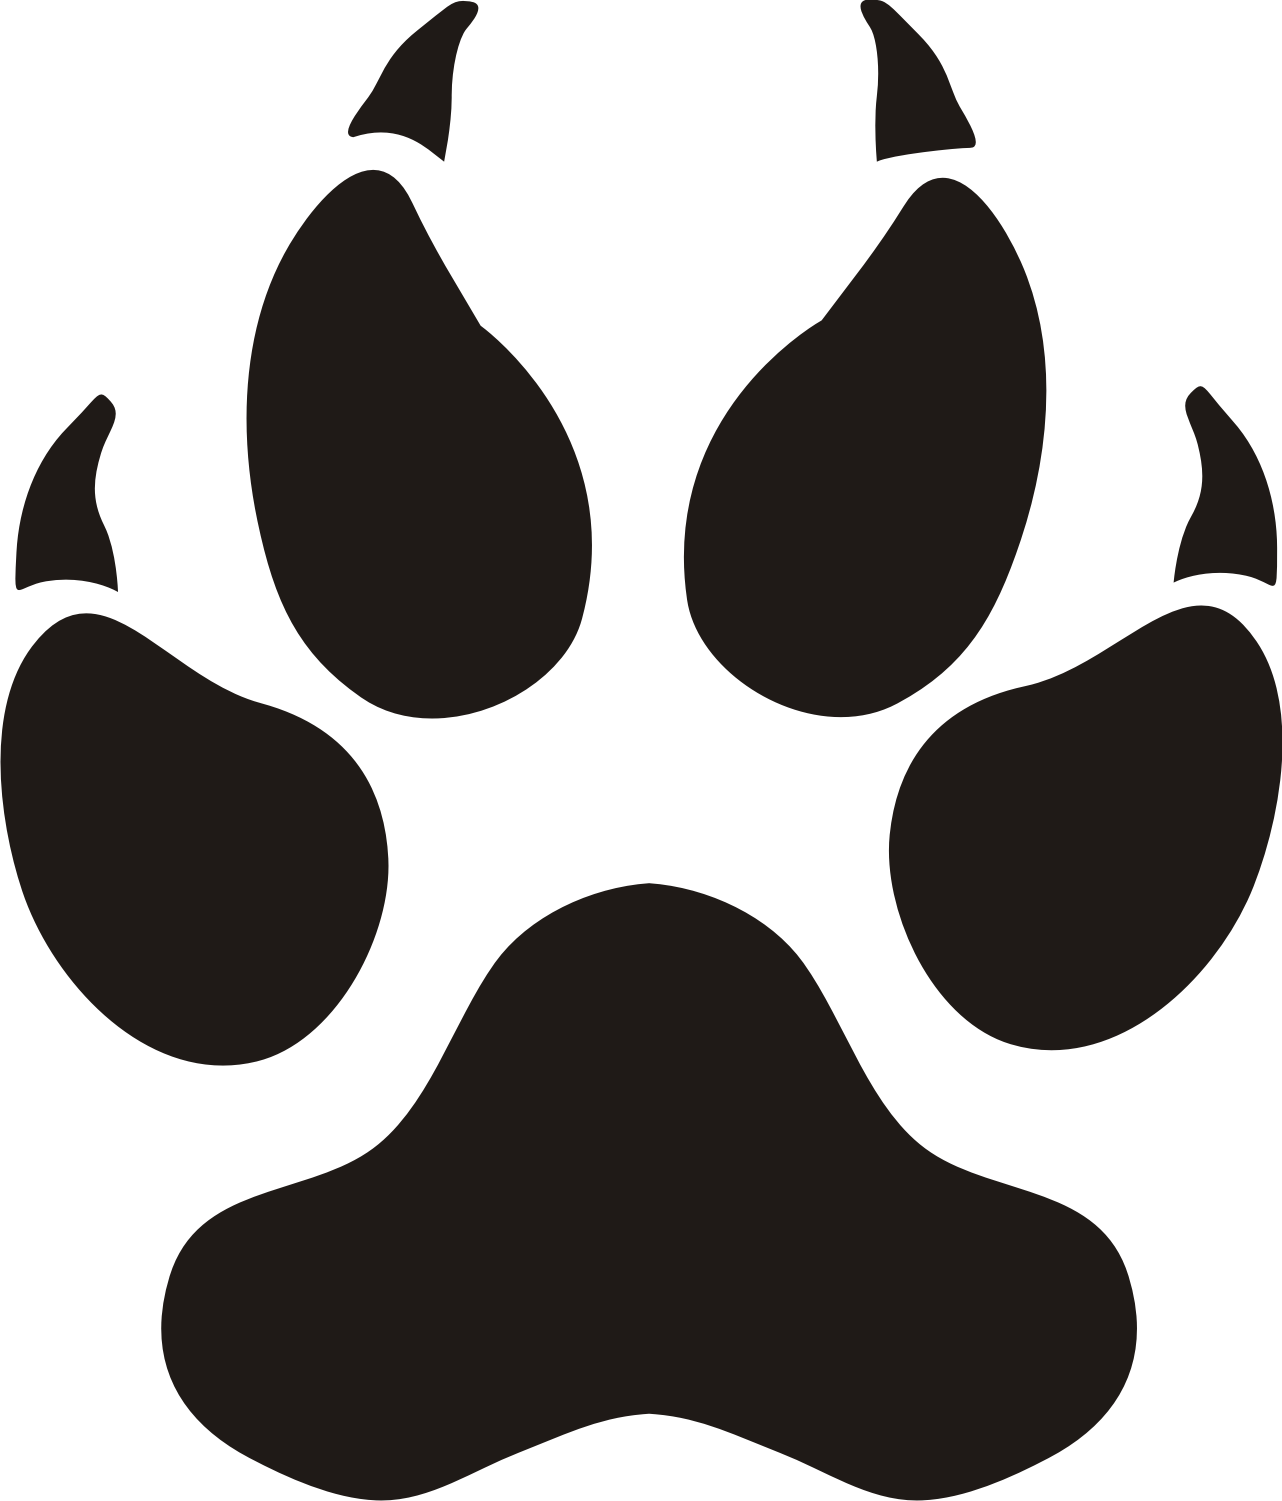 Paw Prints Of A Black Panther - ClipArt Best